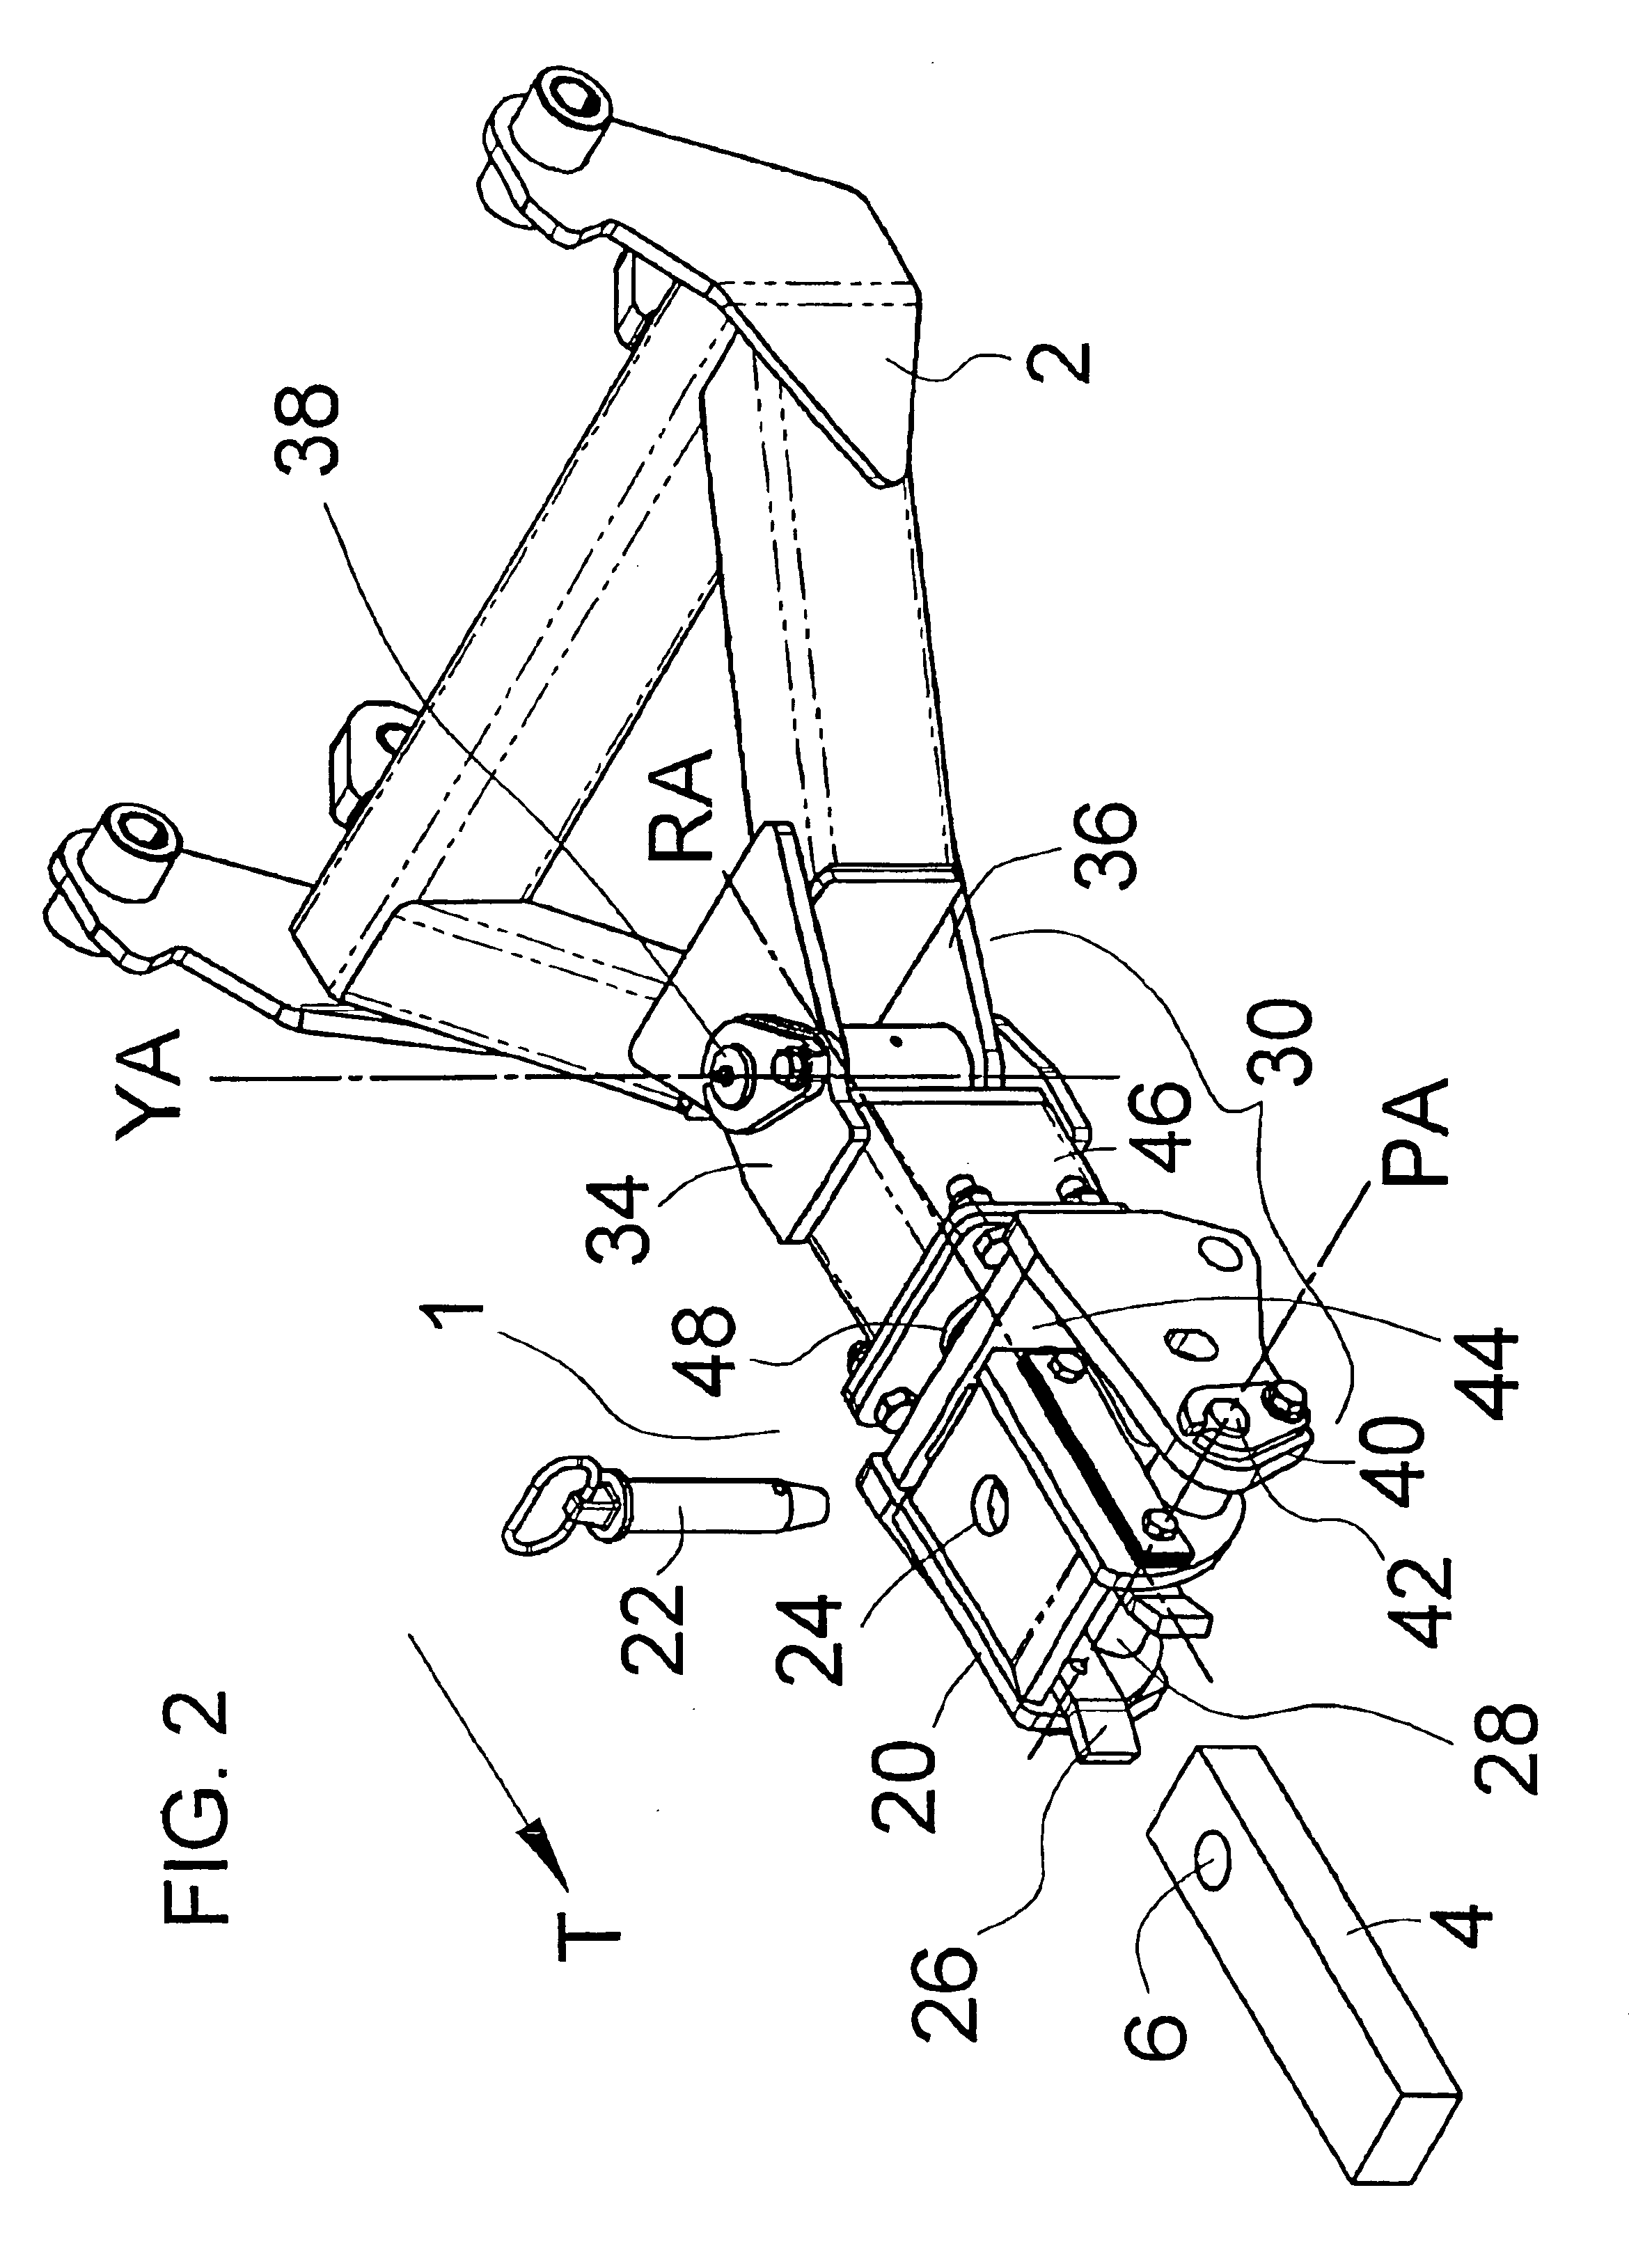 Pivoting implement hitch extension